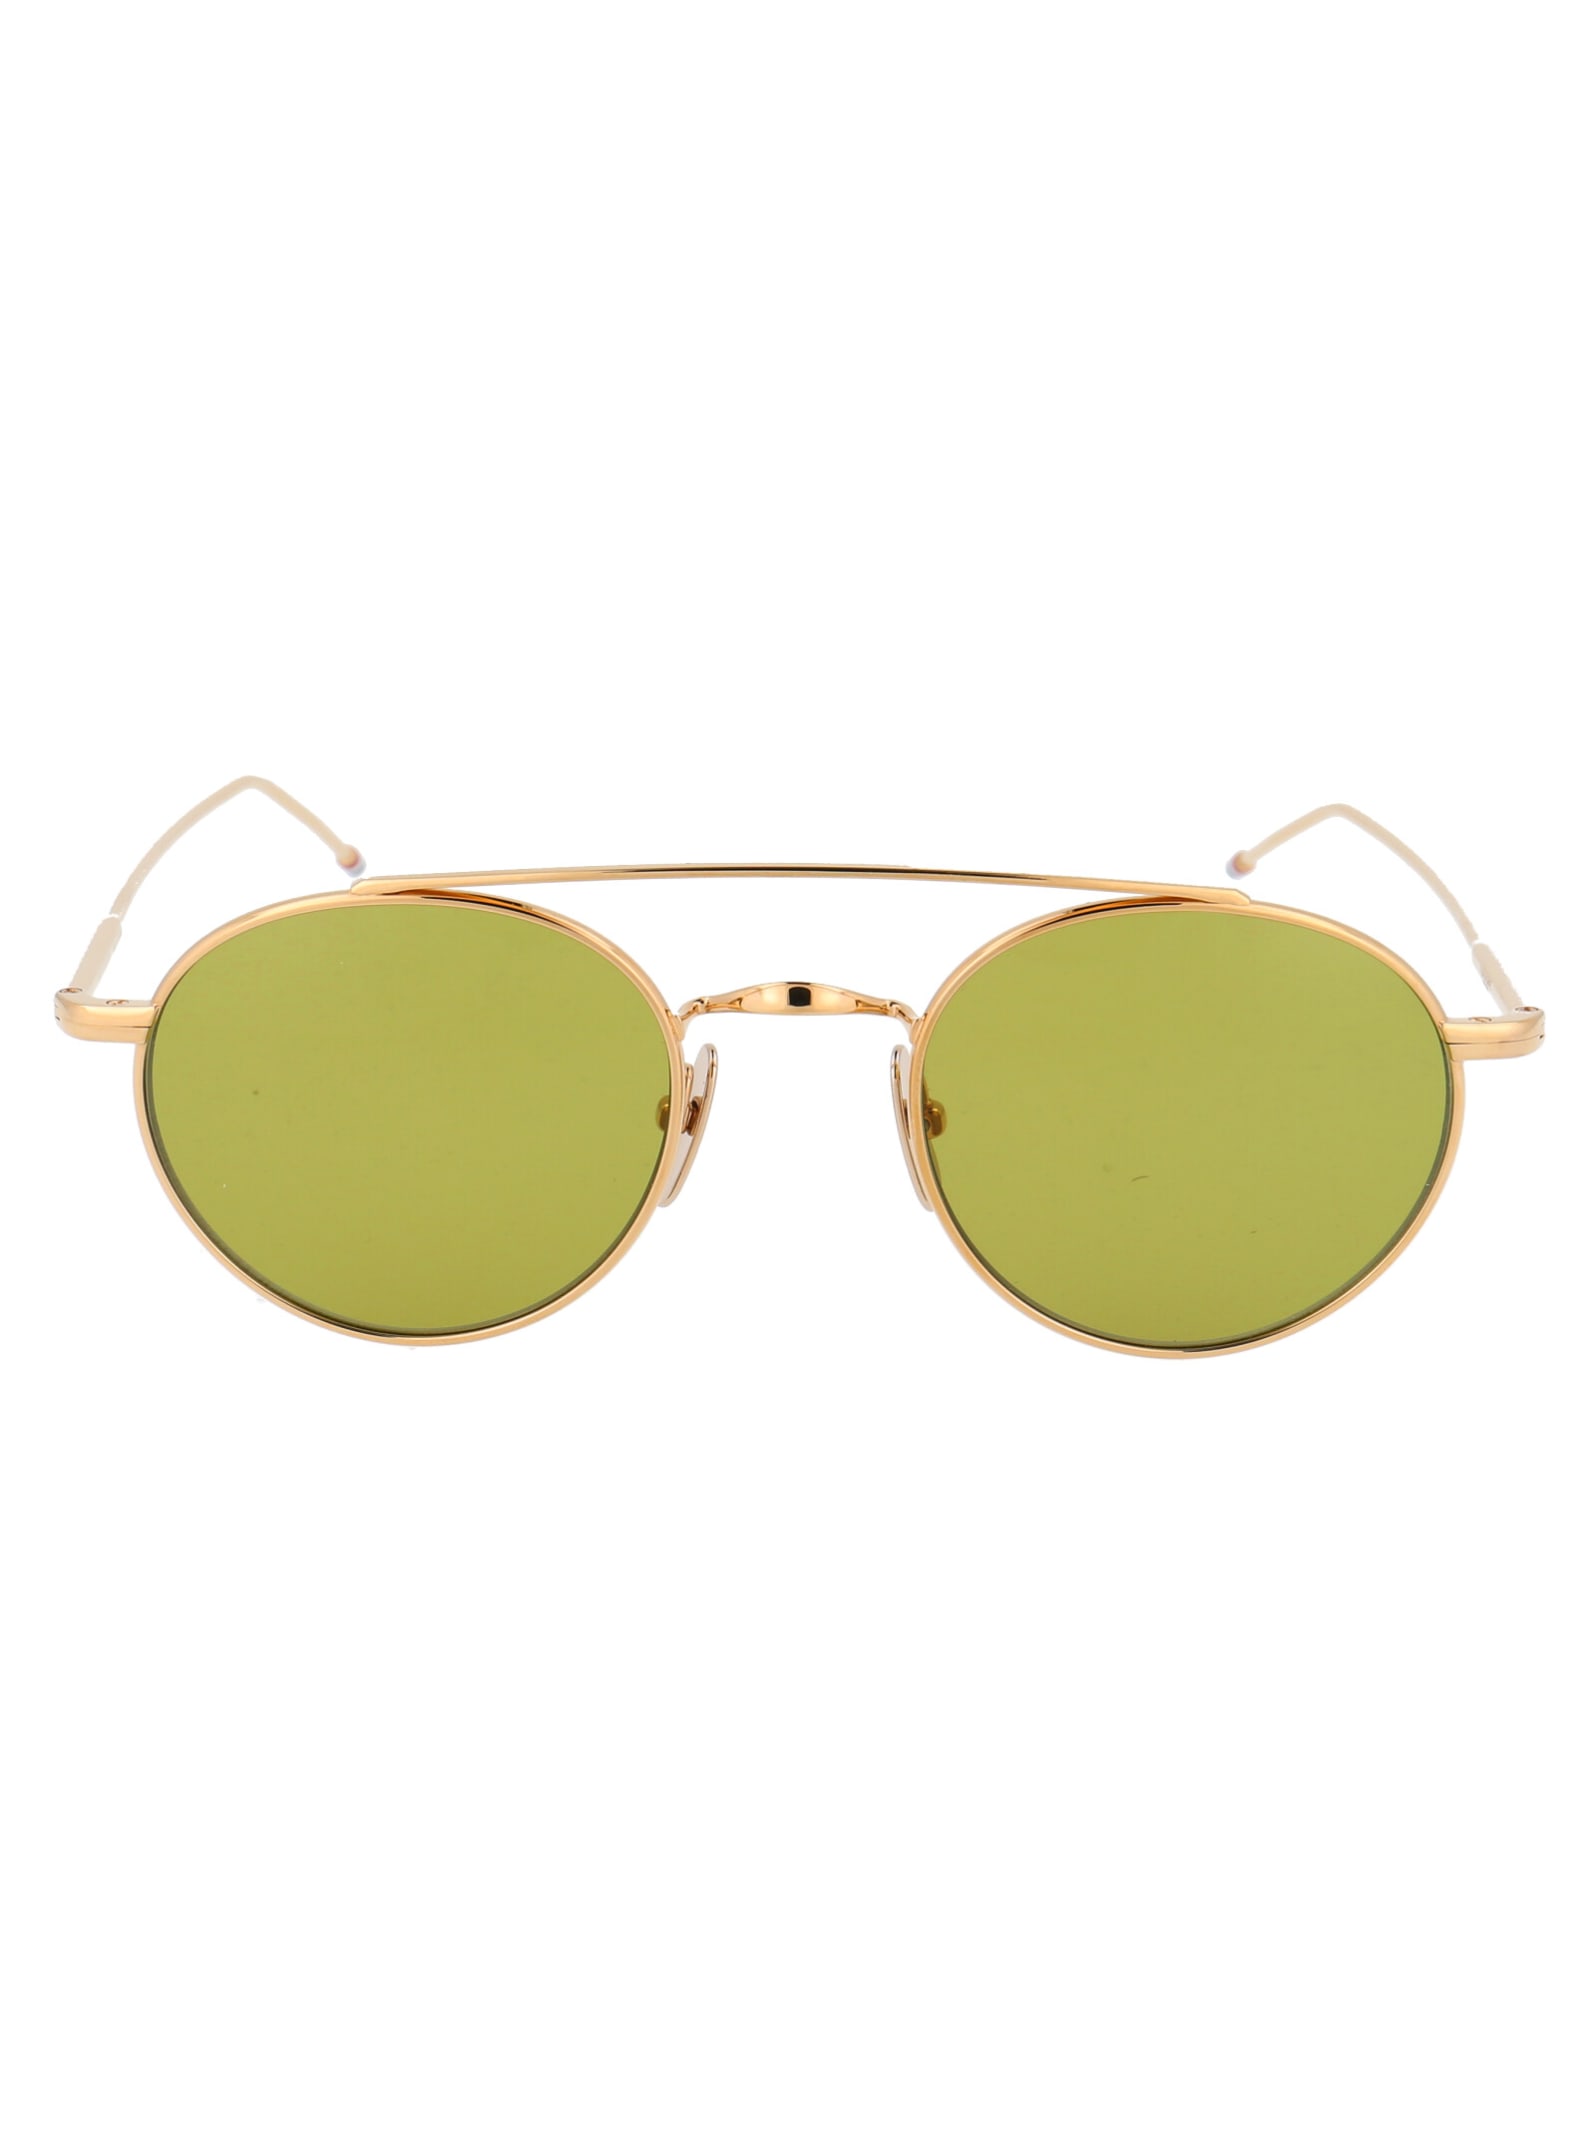 Thom Browne Tb-101 Sunglasses In Shiny 12k Gold W/ Dirty Yellow - Ar